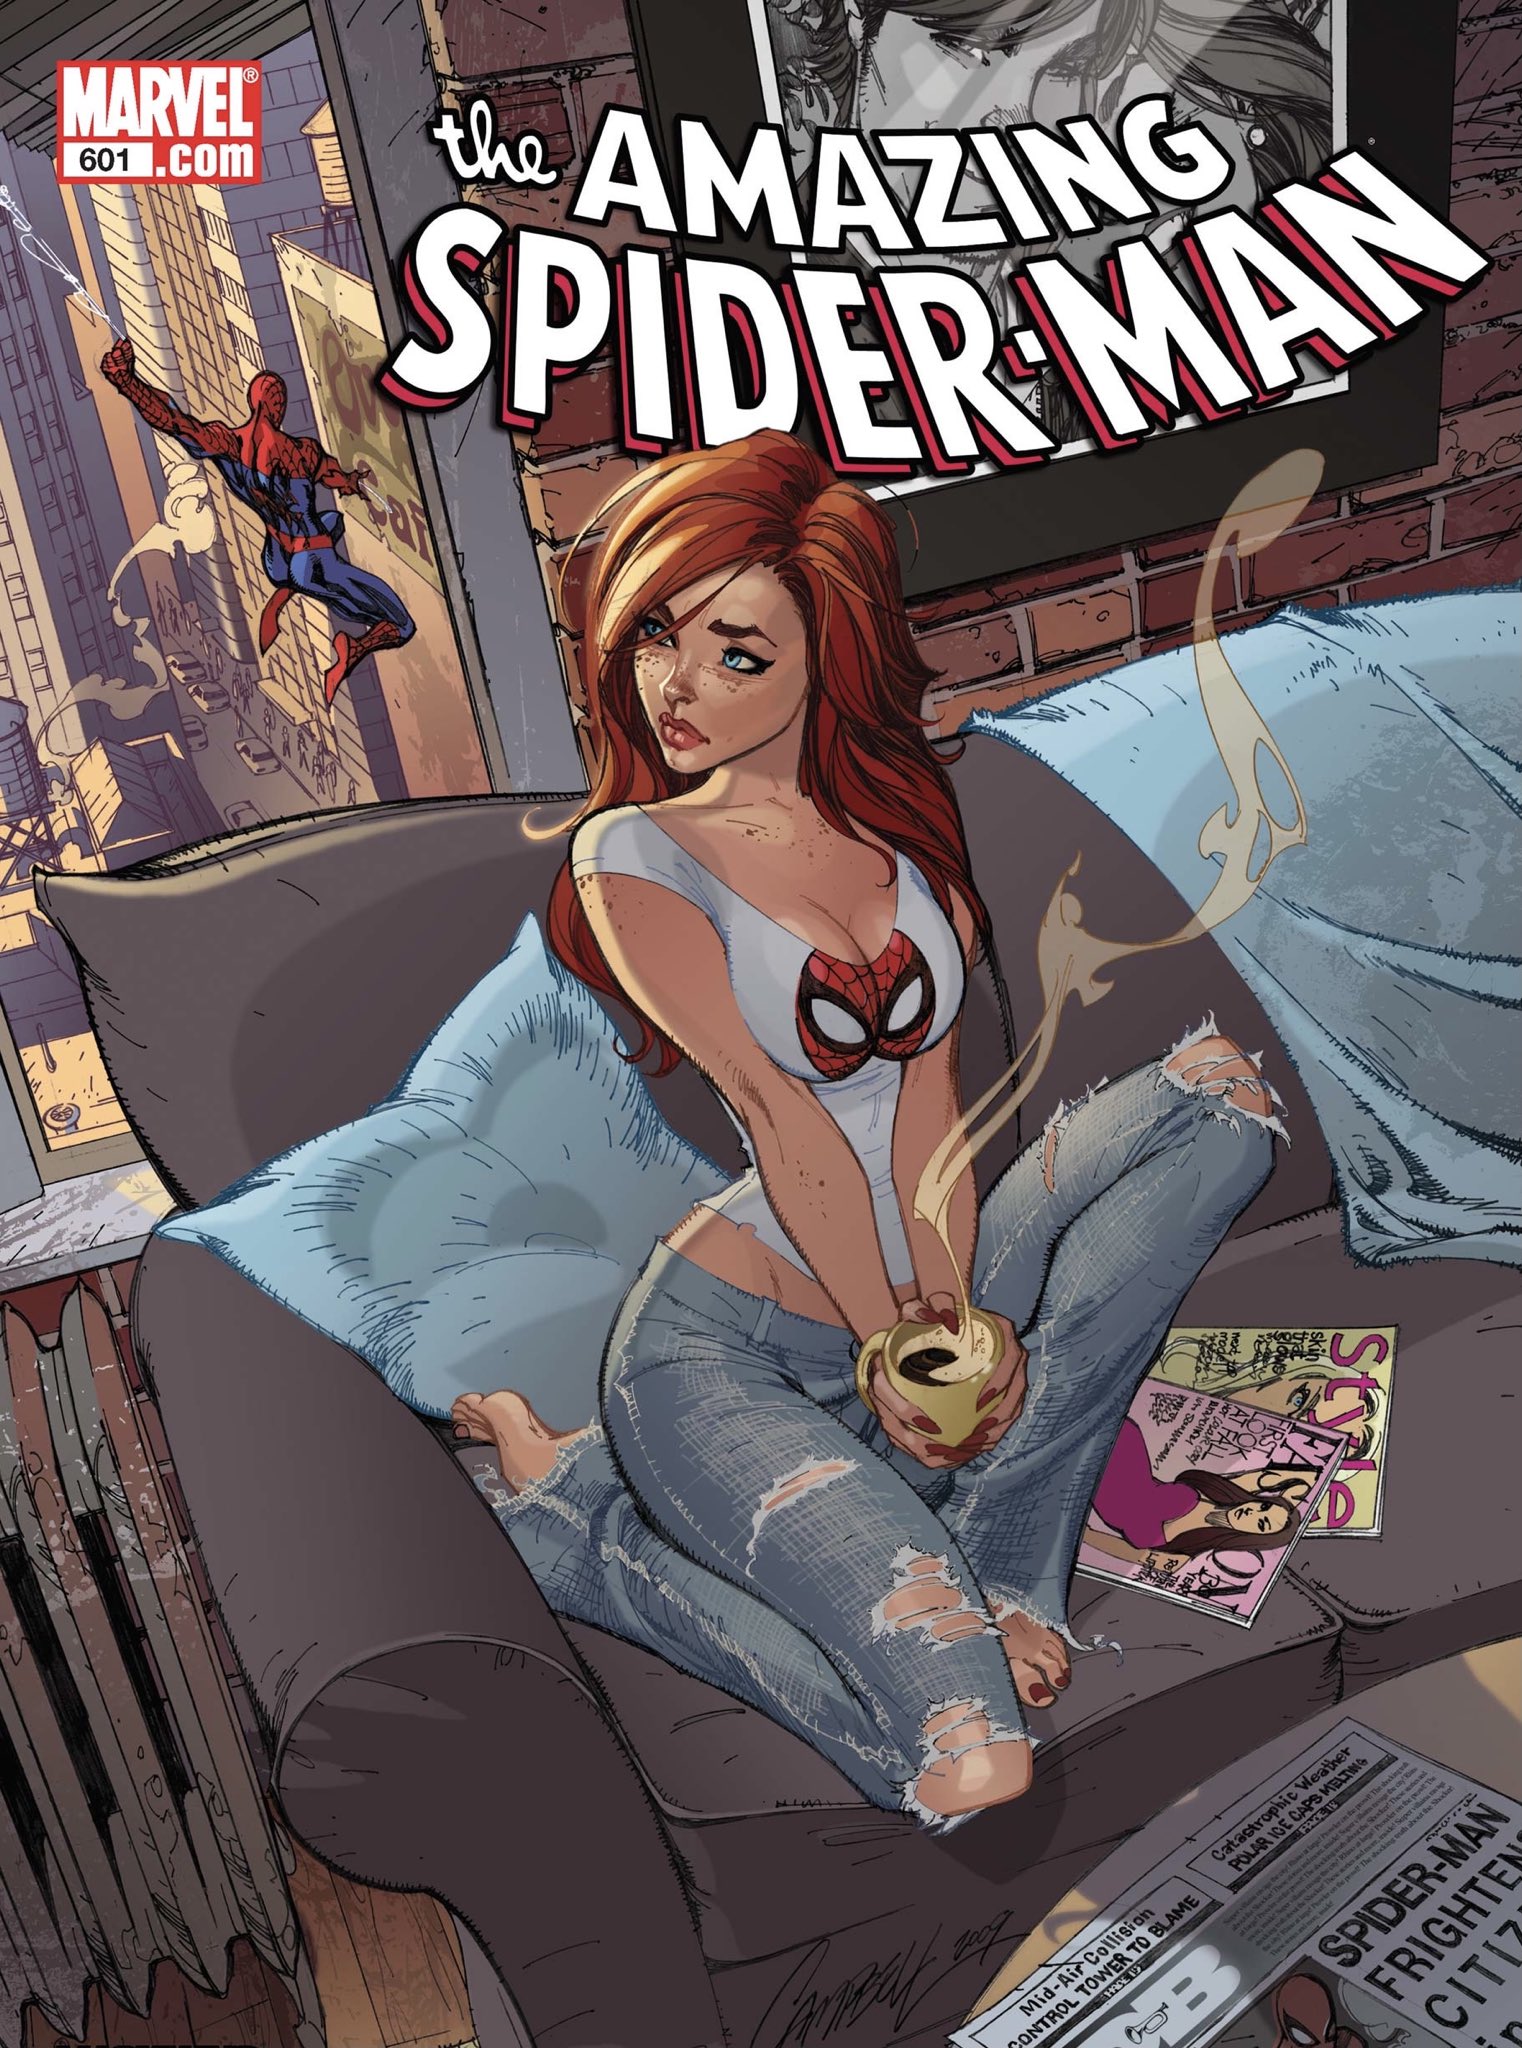 The Amazing Spider-Man Art by j-scott-campbell